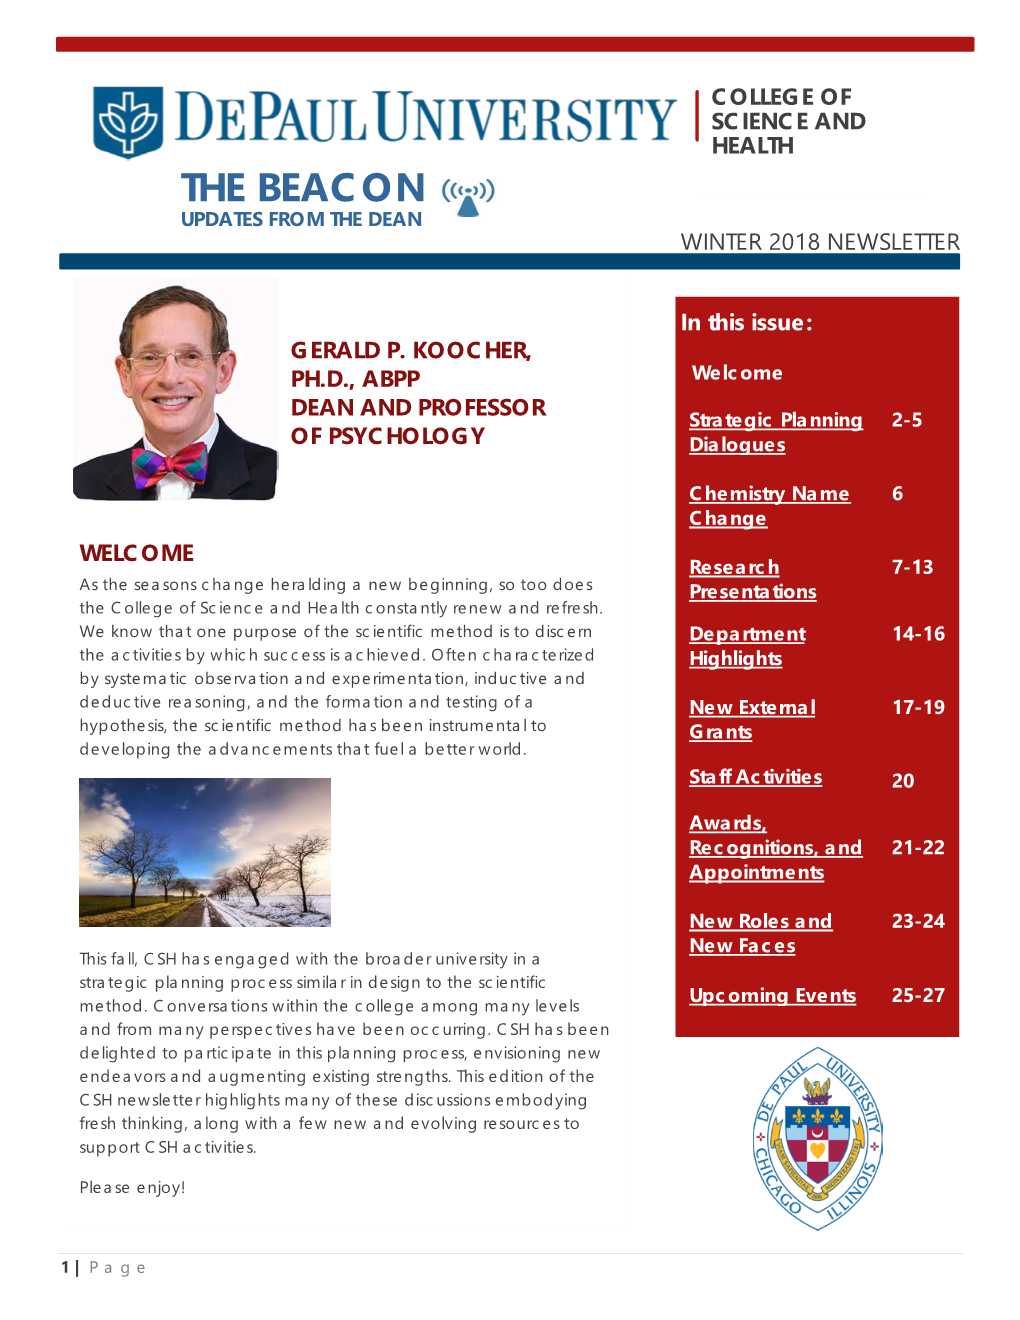 The Beacon Updates from the Dean Winter 2018 Newsletter